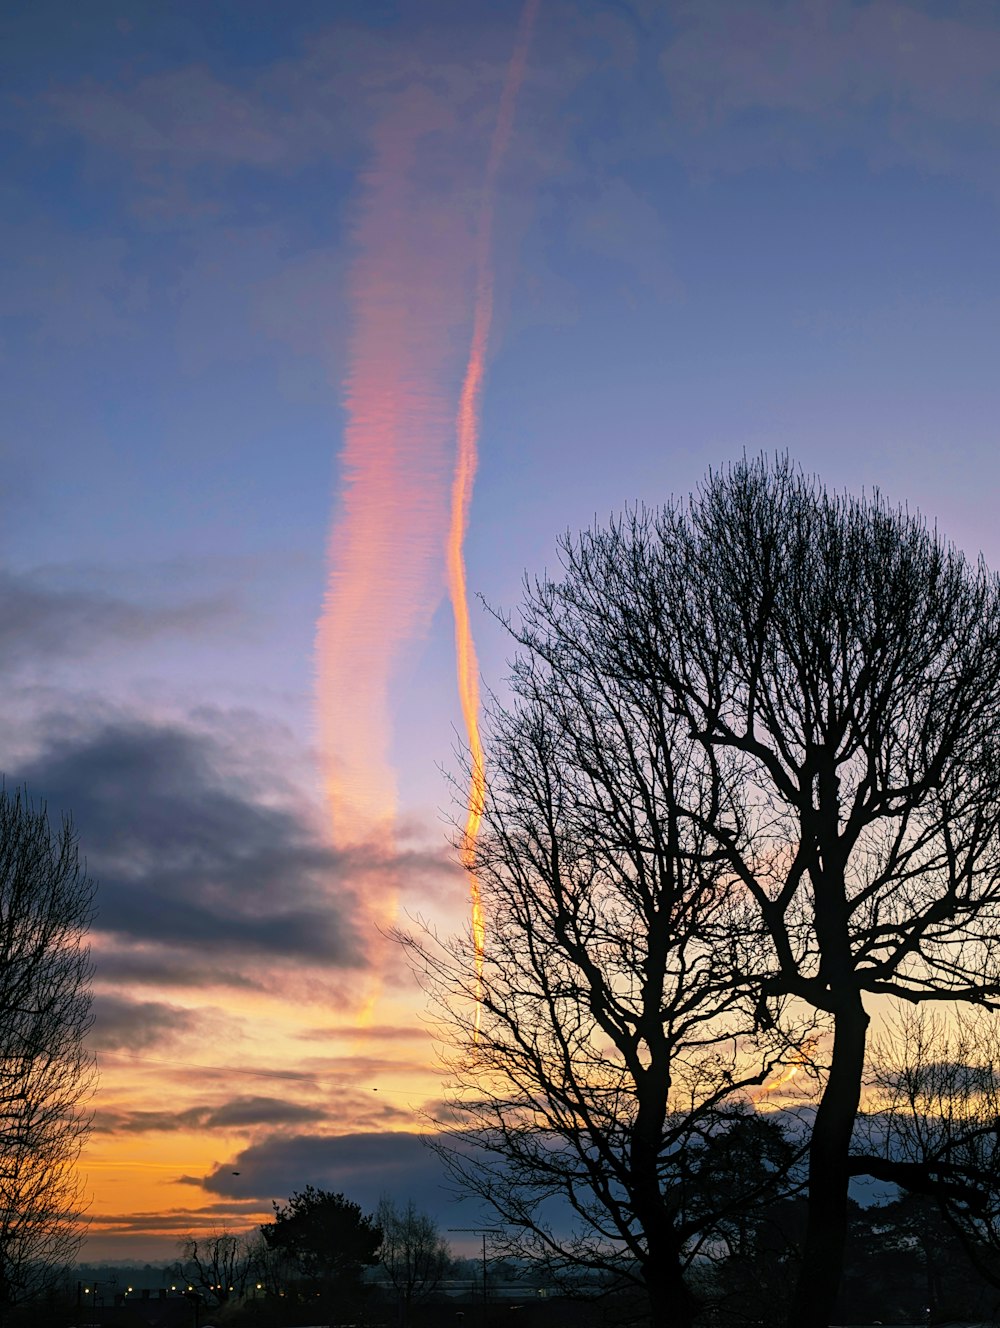 a contrail is seen in the sky above trees